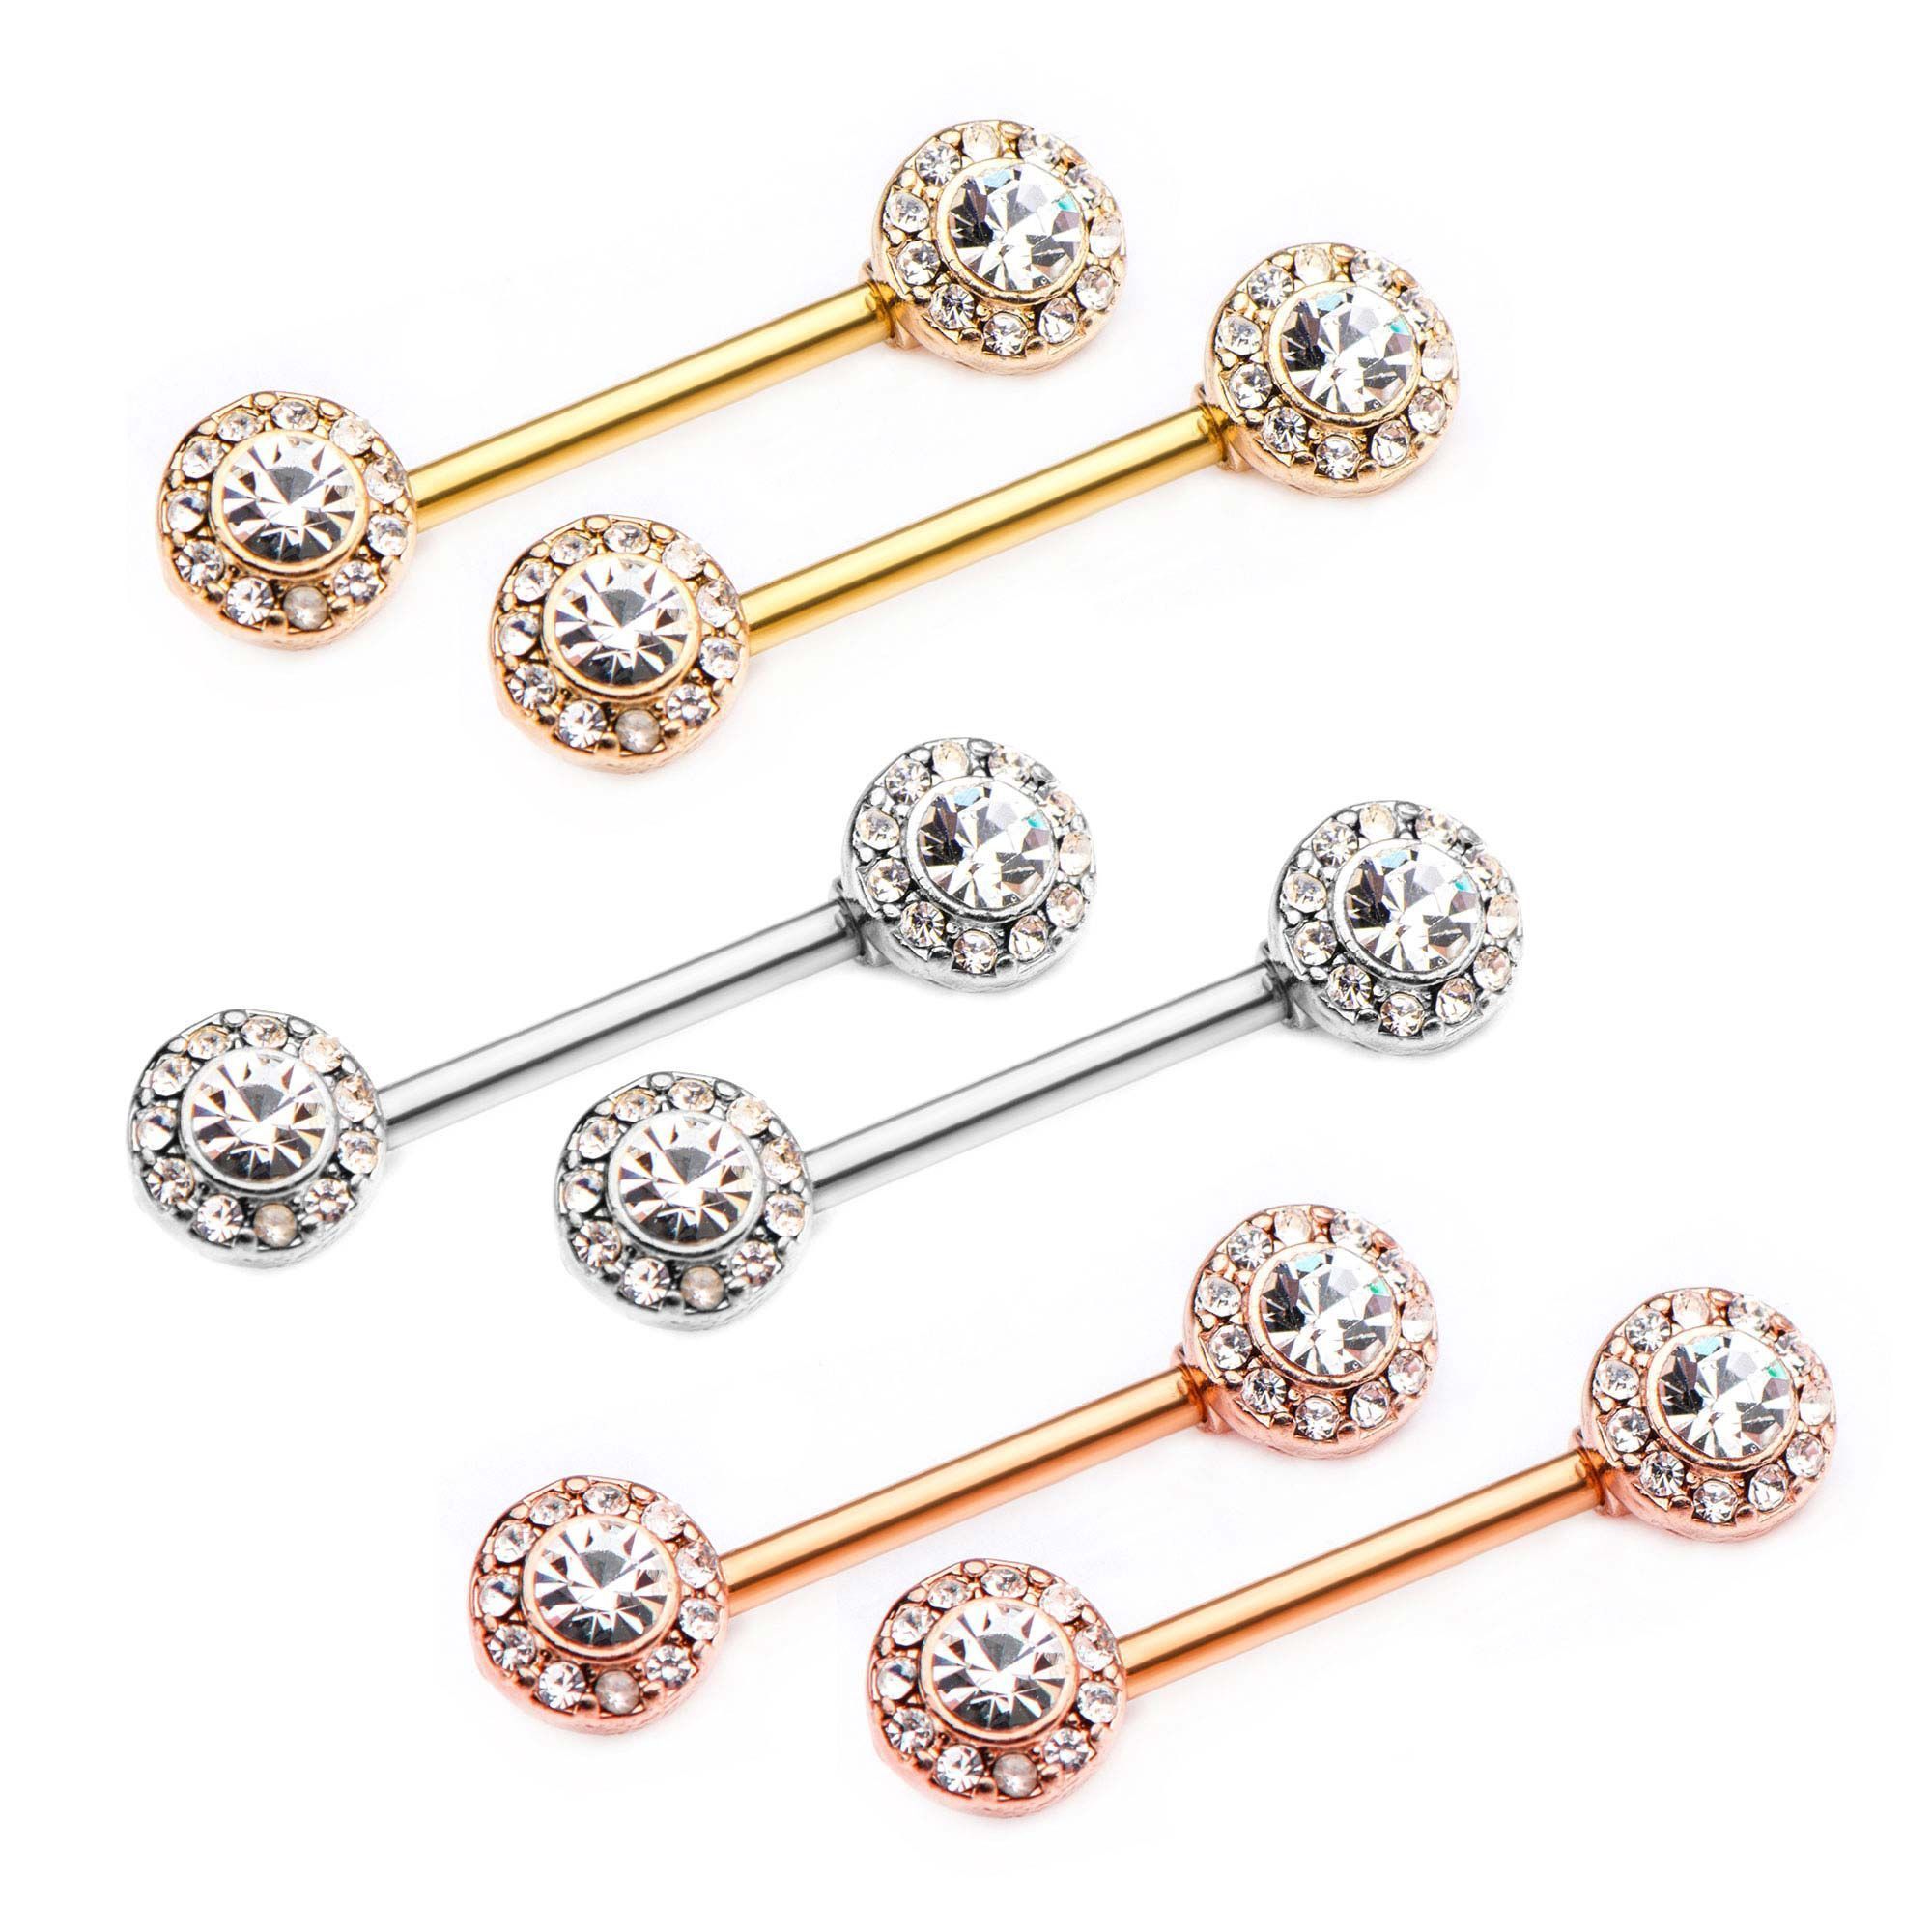 Nipple Barbell 14g 9/16 Forward Facing Outrim Clear CZ Nipple Barbells with 6.5mm ends - 1 Pair sbvnp457rndc -Rebel Bod-RebelBod